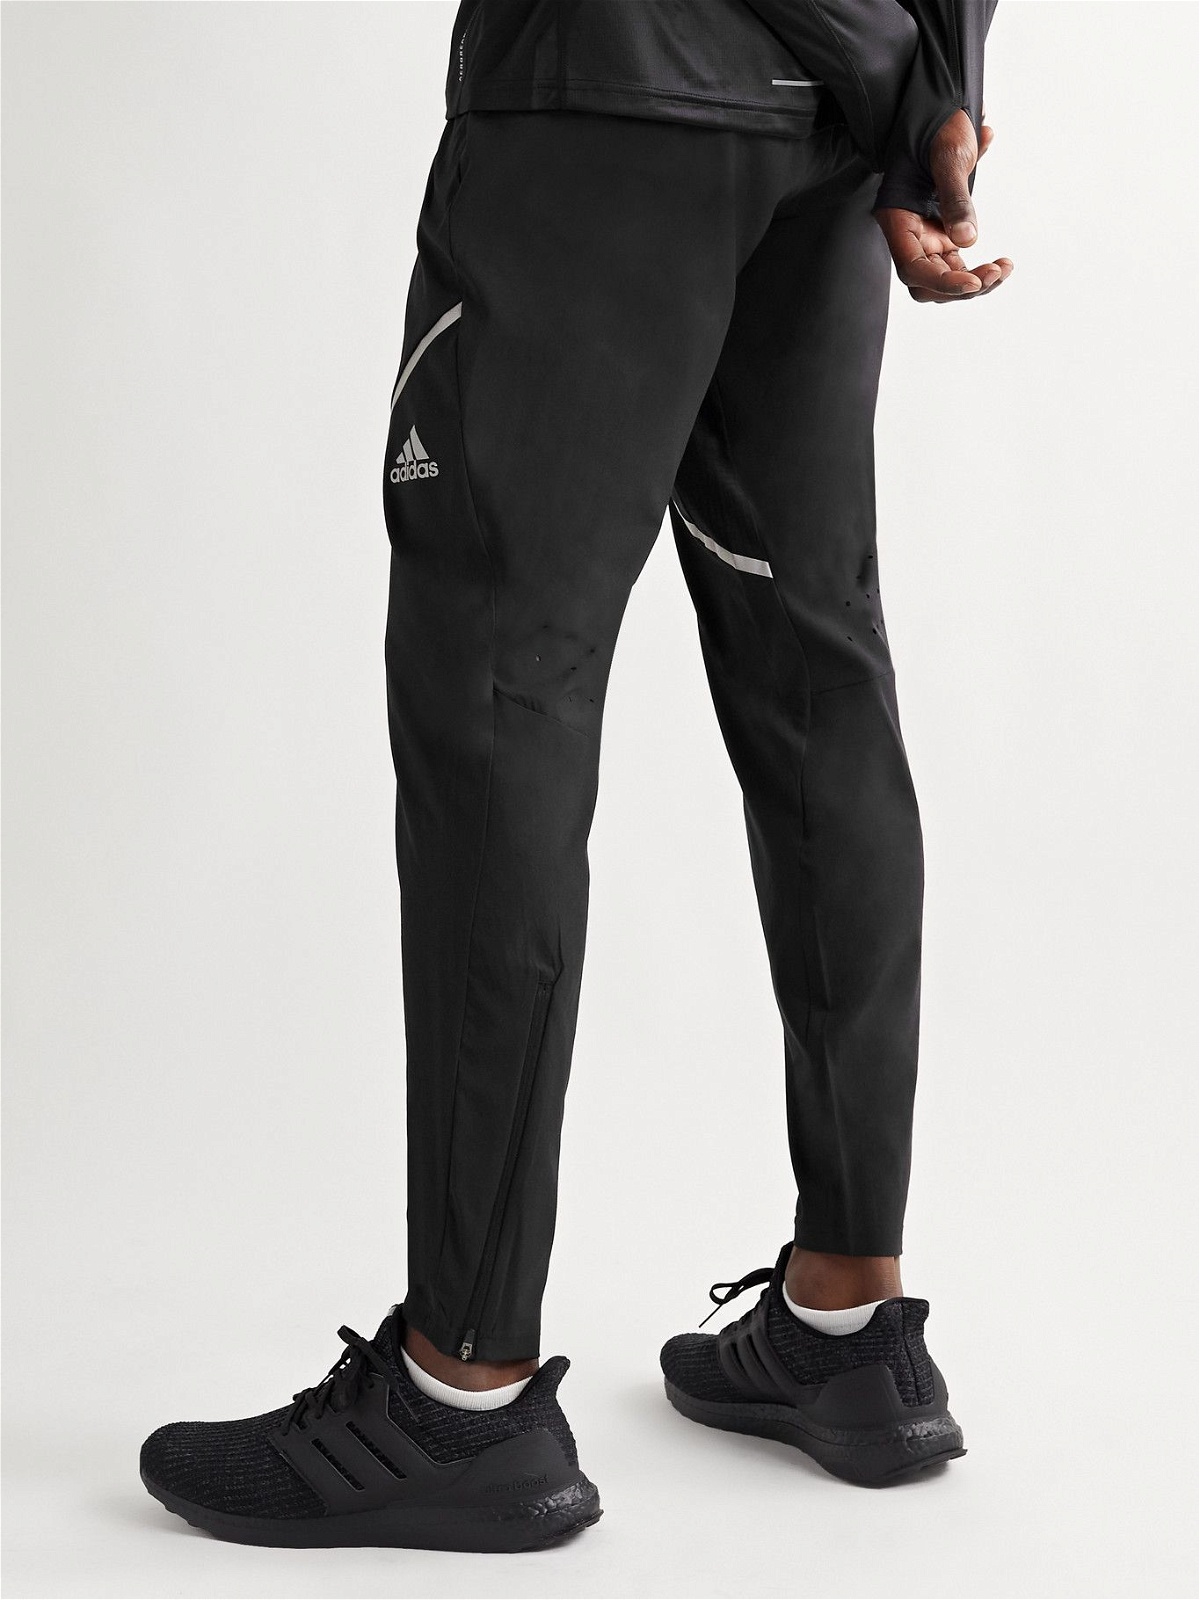 Adidas Tracksuit Pants Adult Martial Arts Trousers Kids Jogging Sports  Bottoms | eBay